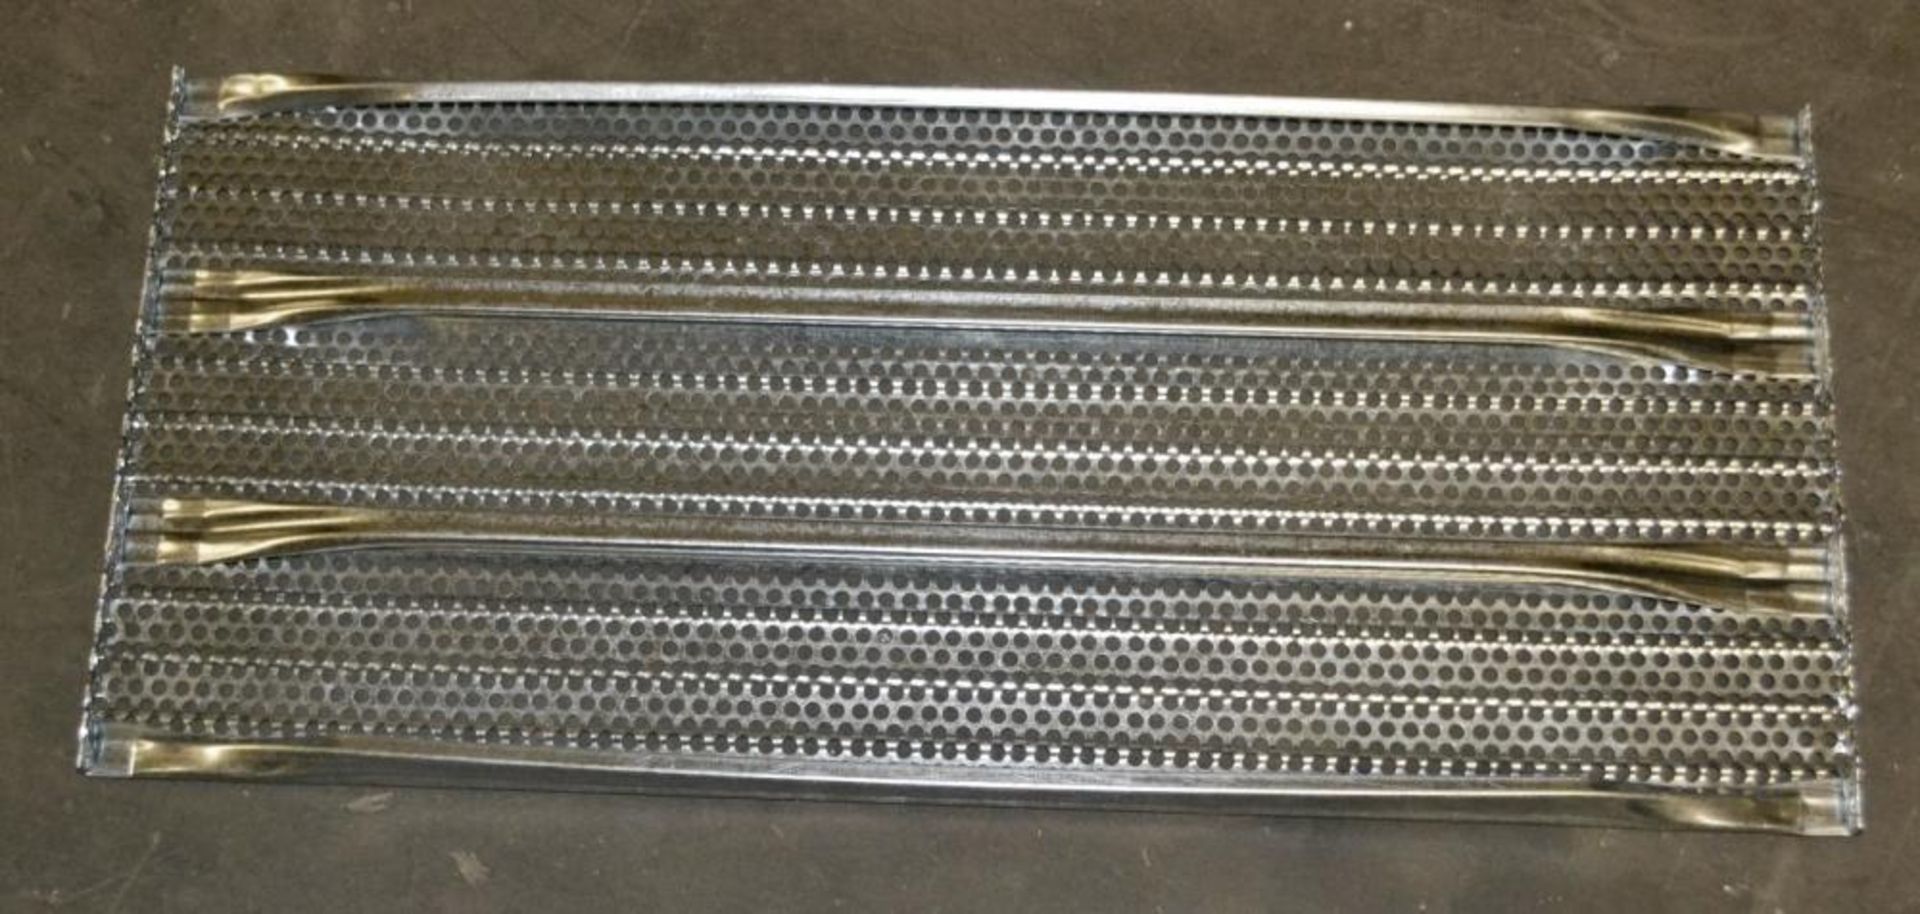 13 x Bays of Metalsistem Steel Modular Storage Shelving - Includes 28 Pieces - Recently Removed - Image 4 of 17